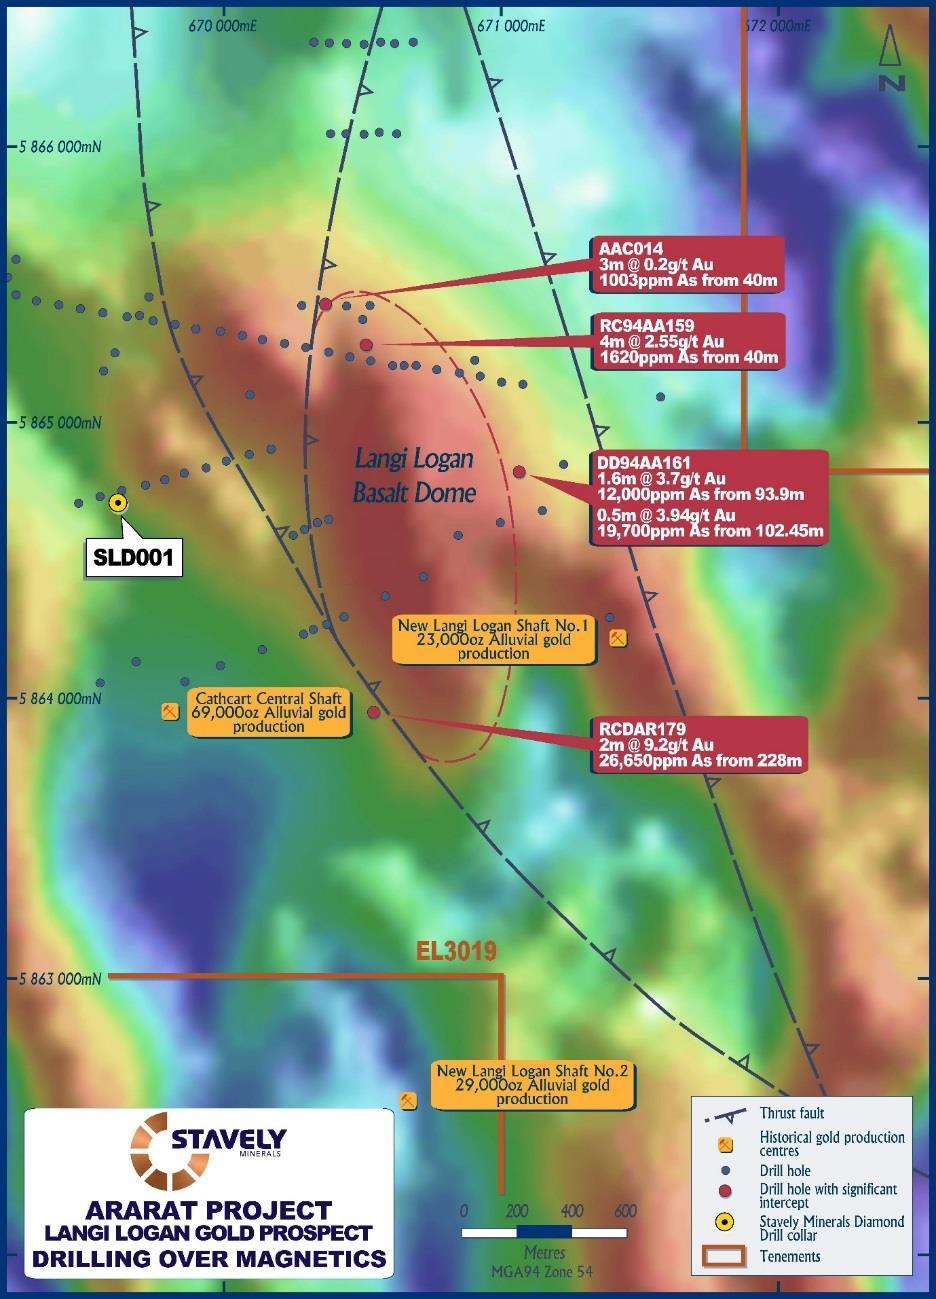 DIRECTORS REPORT 31 December 2014 Additionally, the historic Carroll s Copper Prospect has possibly been re-discovered by recent mapping and is located up the stratigraphic sequence some 100m or more